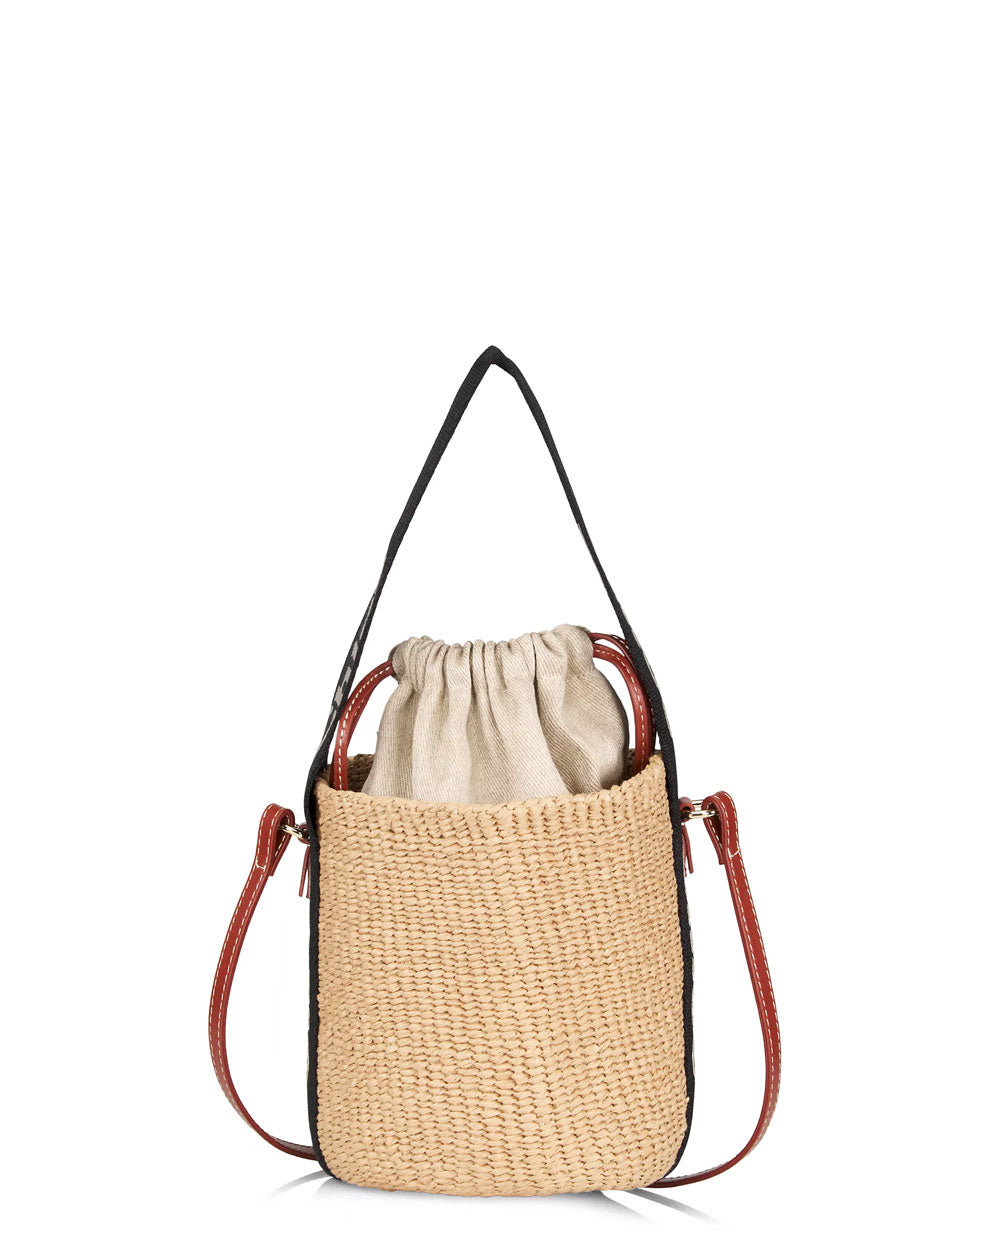 Small Woody Basket Bag in Black and Beige